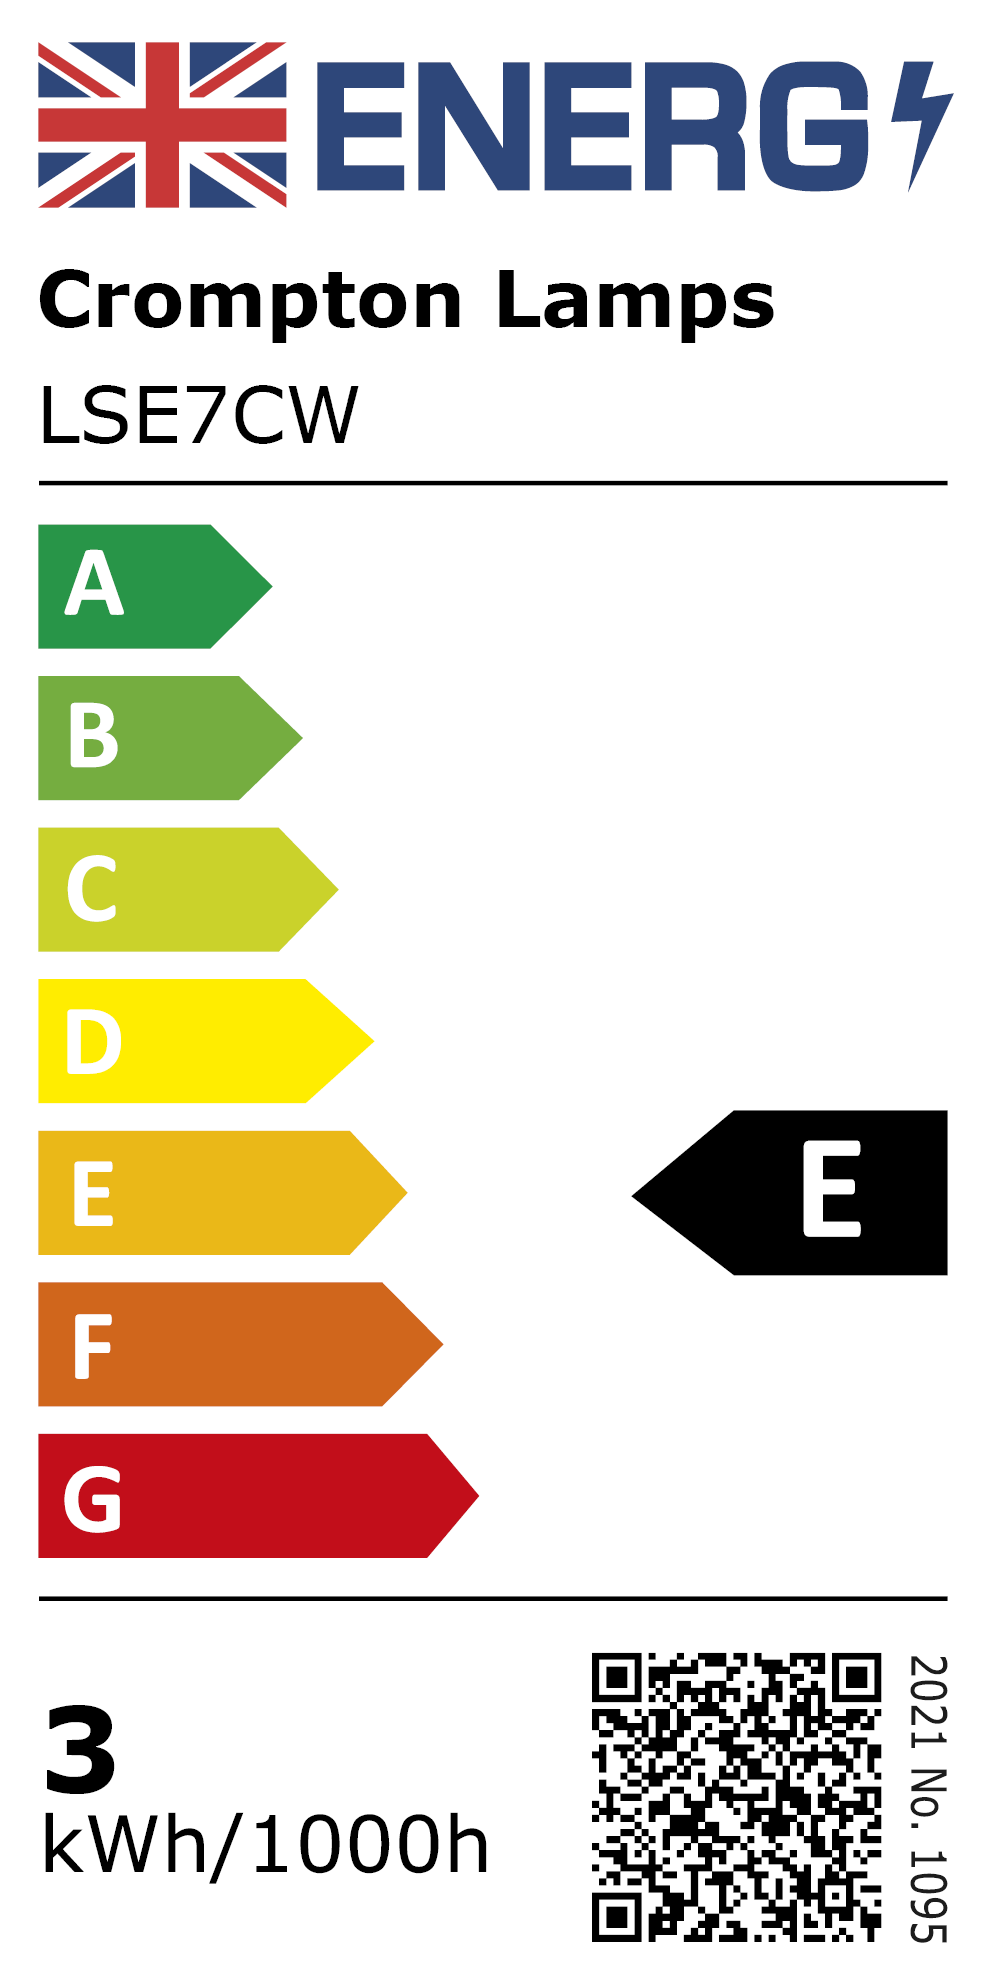 New 2021 Energy Rating Label: MPN LSE7CW